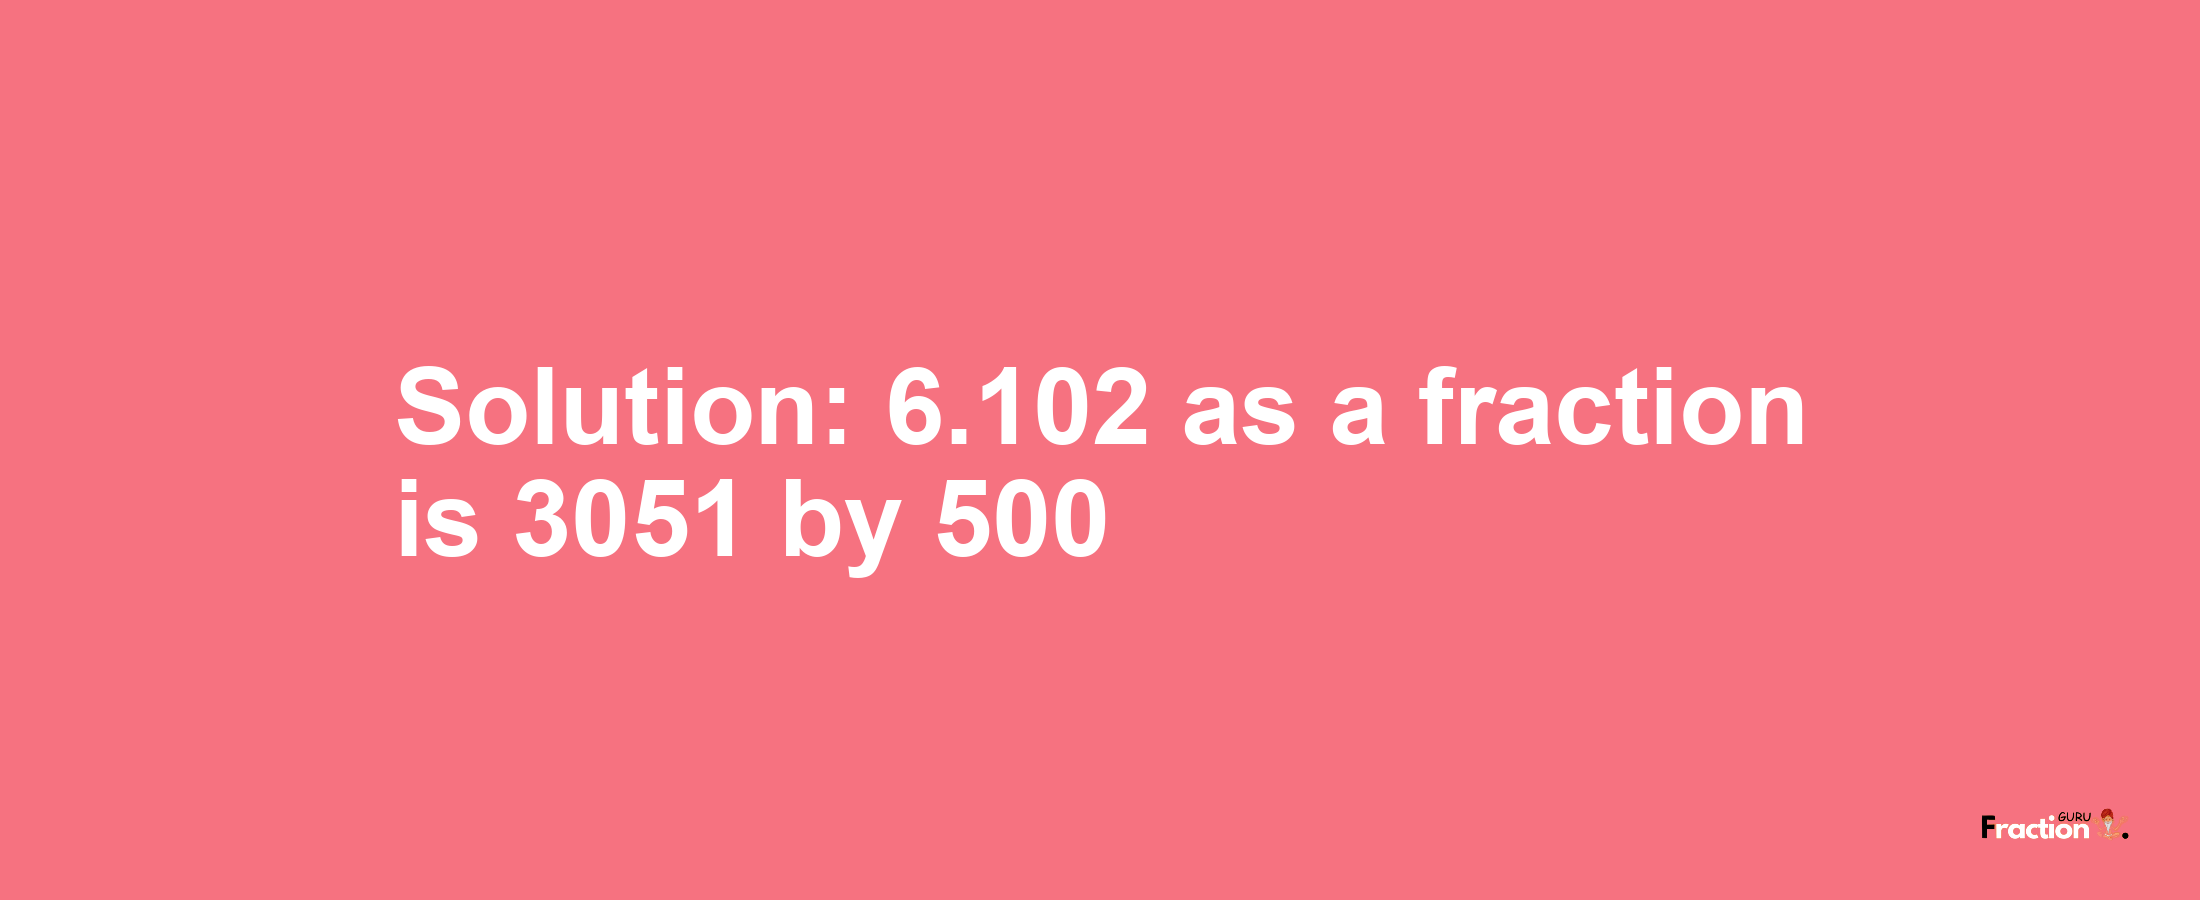 Solution:6.102 as a fraction is 3051/500